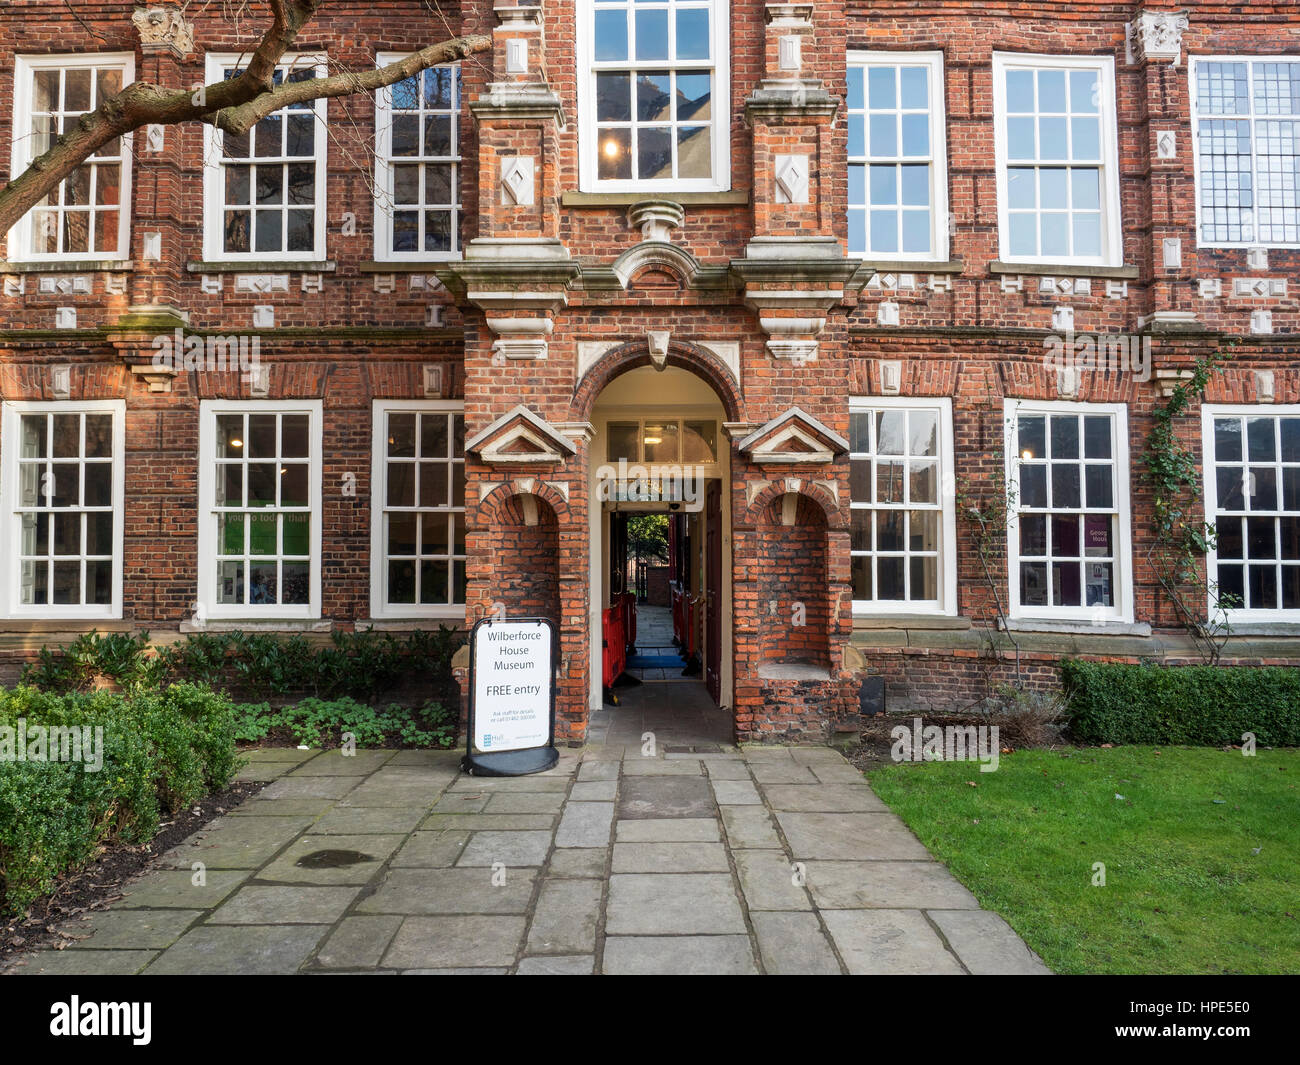 Wilberforce House Museum in Hull Yorkshire England Stockfoto